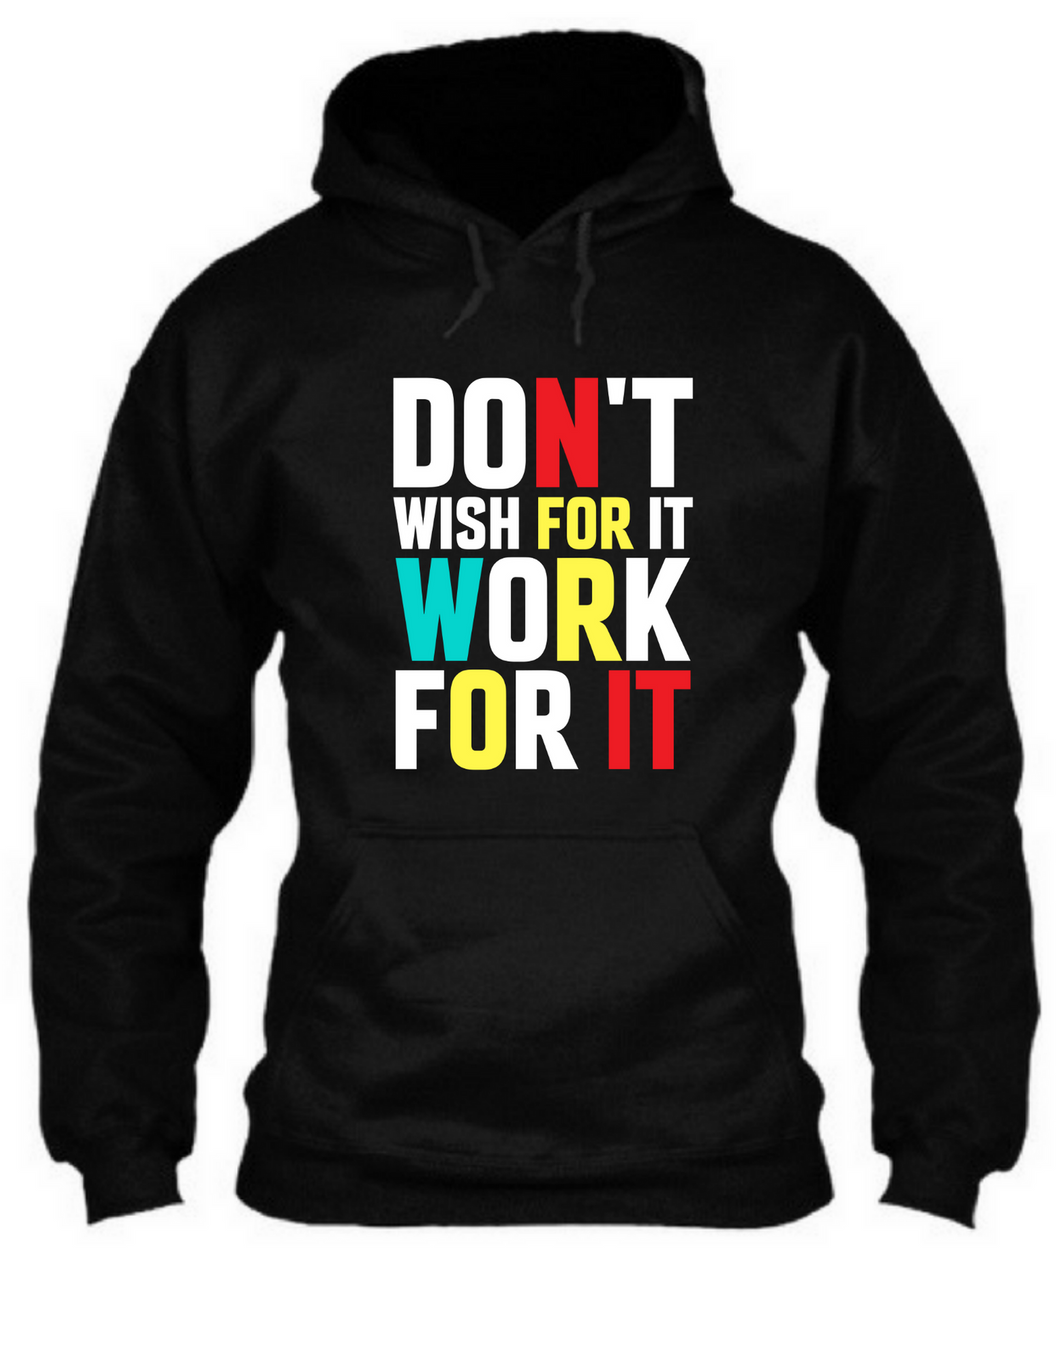 Don't wish for it work for it - Unisex Hoodie